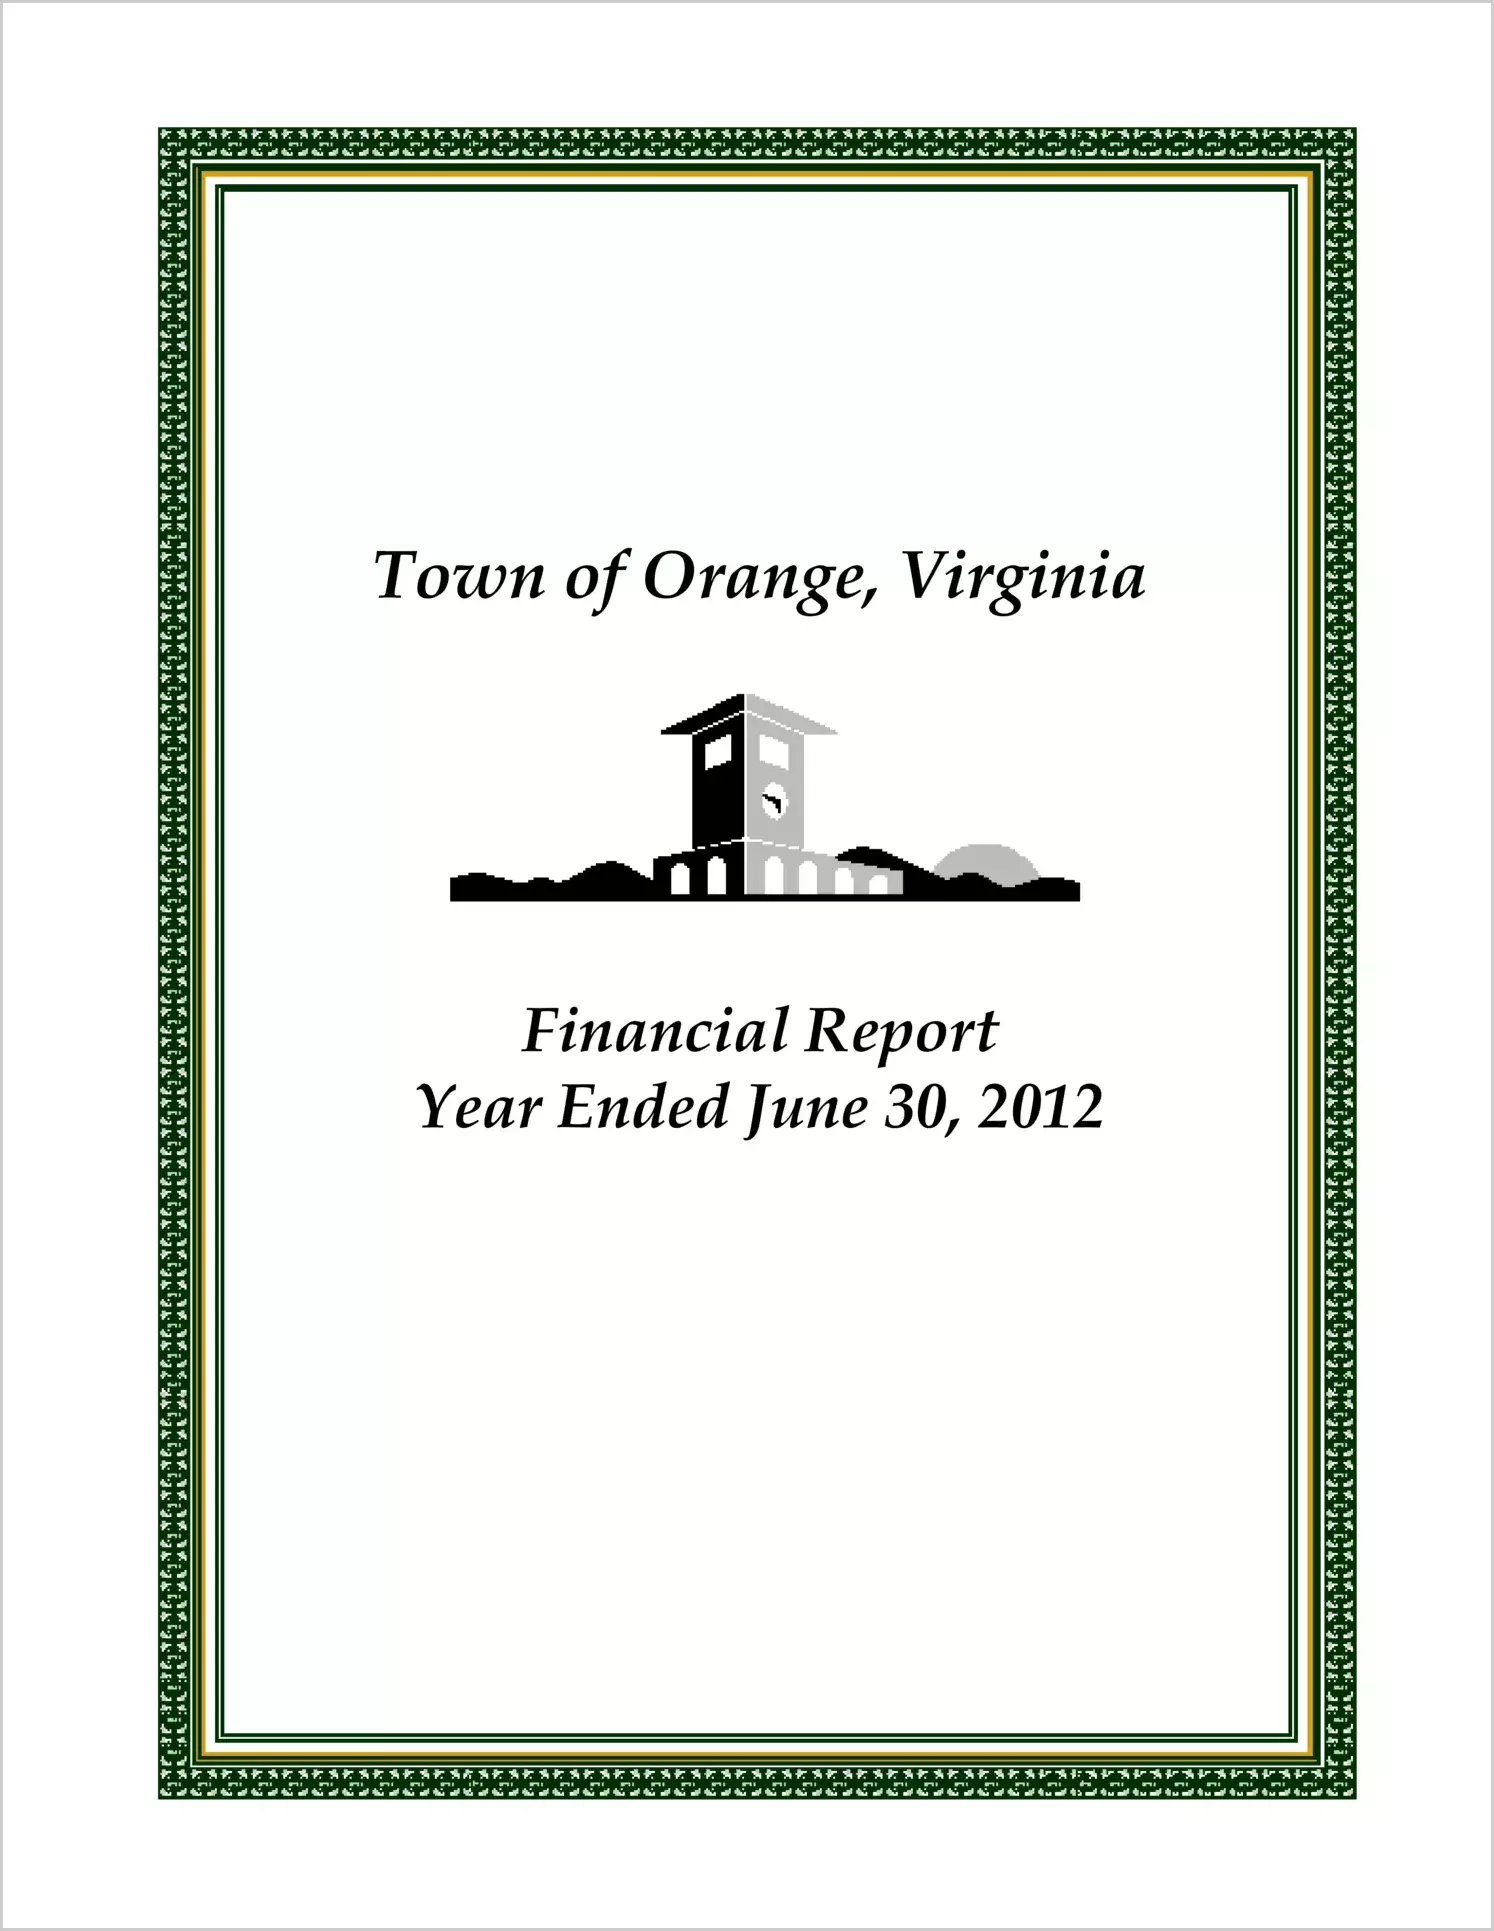 2012 Annual Financial Report for Town of Orange